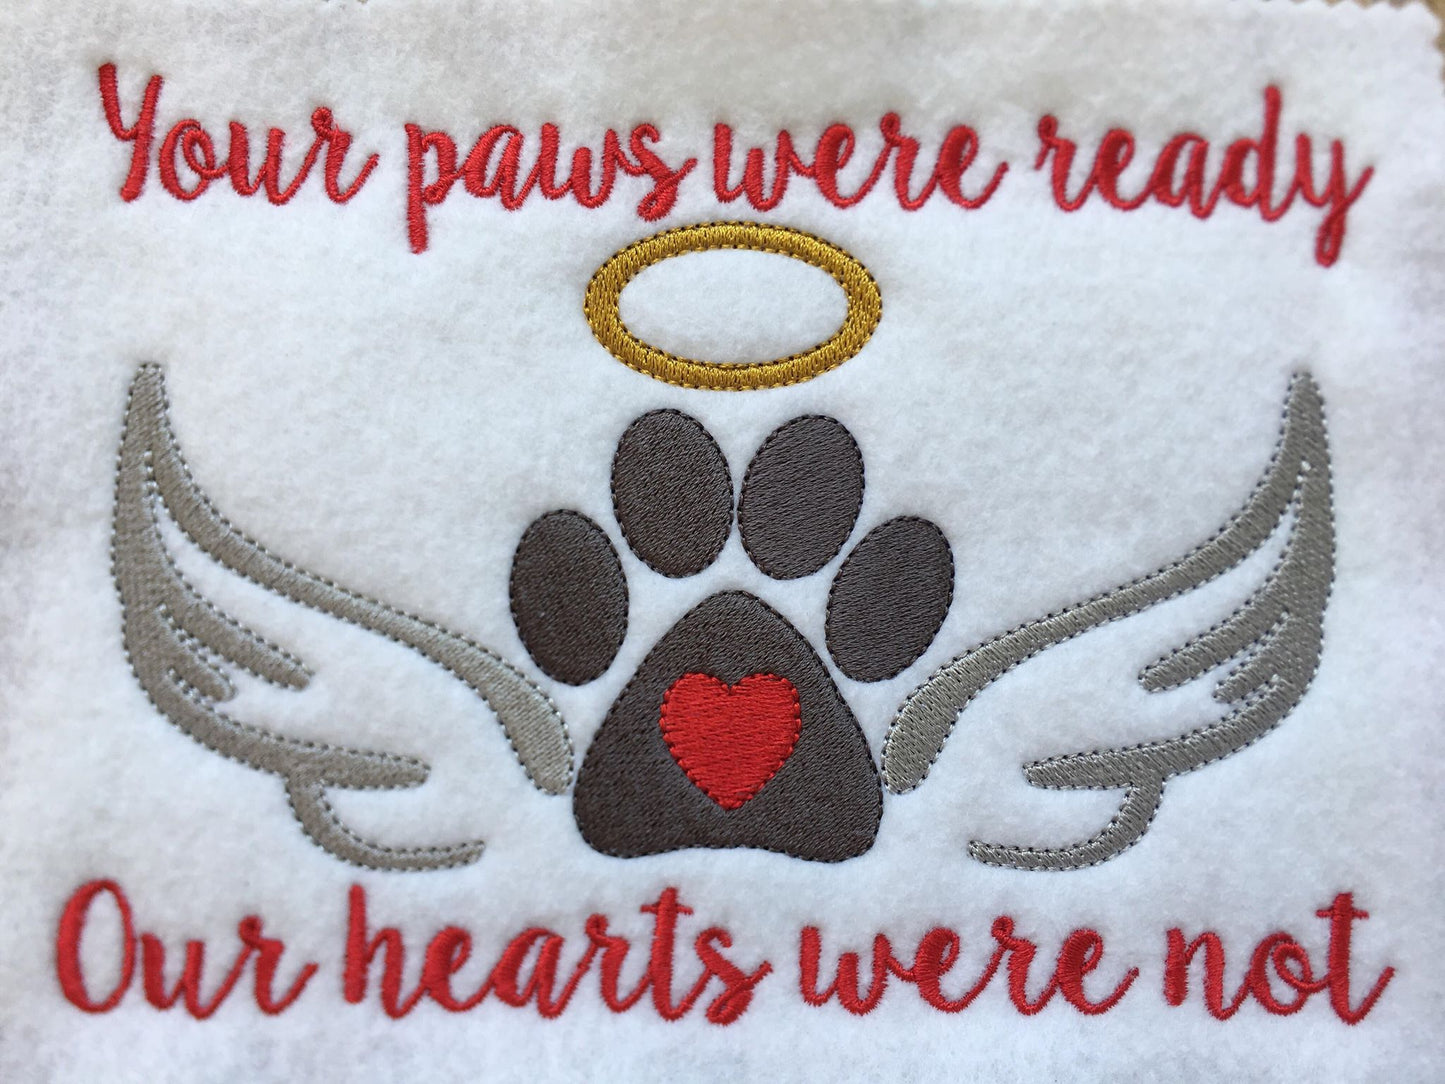 Paws were ready, but our hearts were not - 5 x 7 - Embroidery Design - DIGITAL Embroidery DESIGN